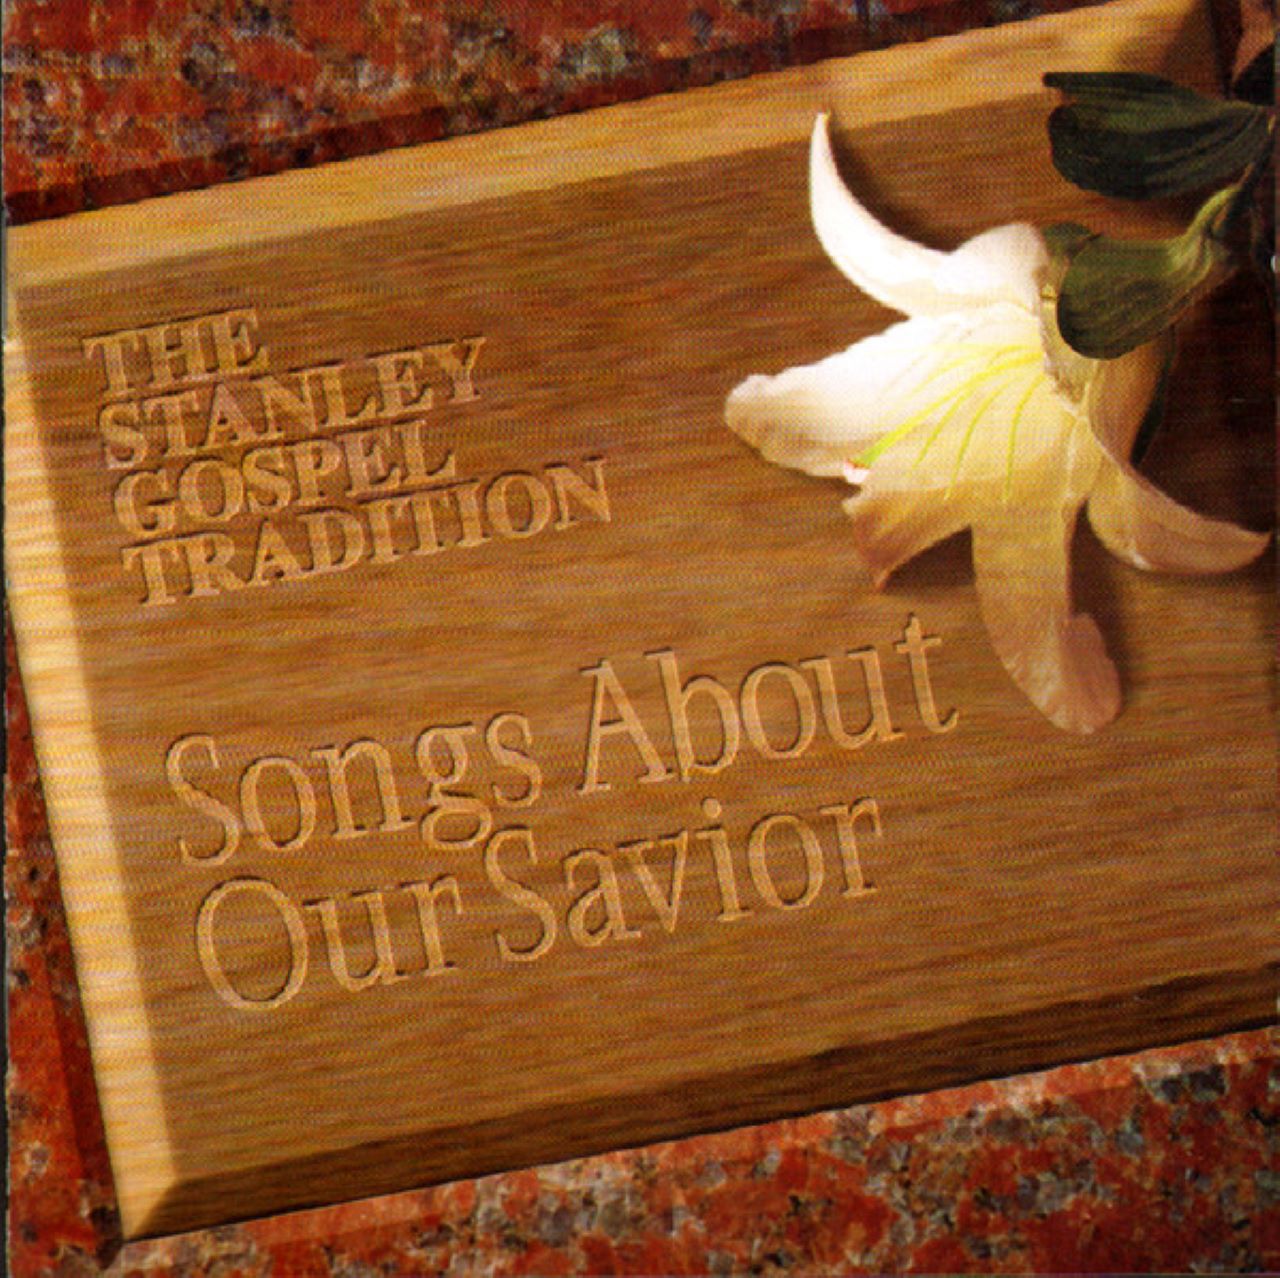 A.A.V.V. - The Stanley Gospel Tradition - Songs About Our Savior cover album